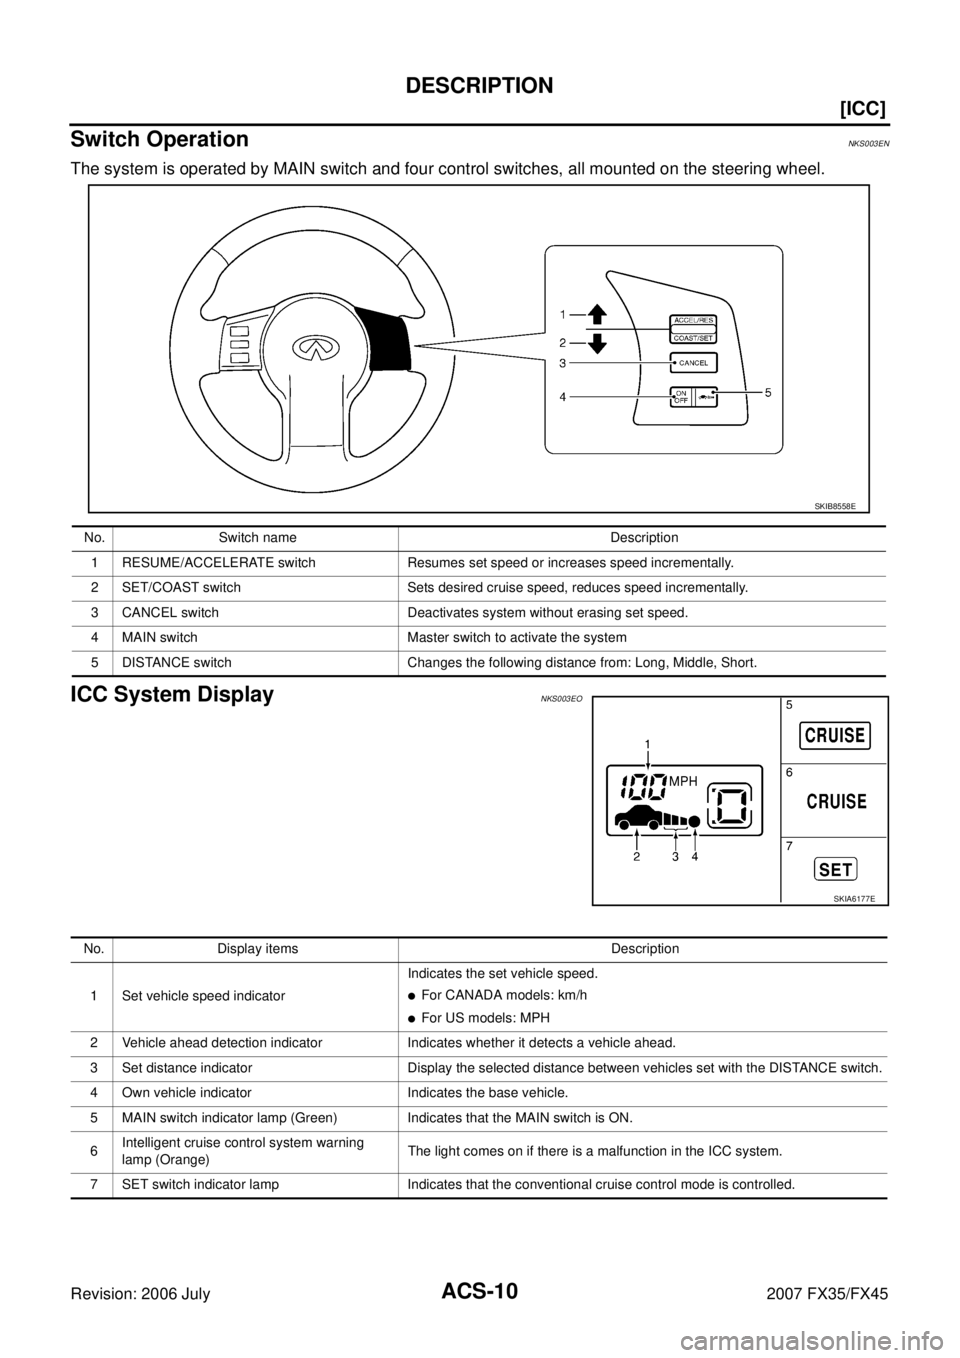 INFINITI FX35 2007  Service Manual ACS-10
[ICC]
DESCRIPTION
Revision: 2006 July 2007 FX35/FX45
Switch OperationNKS003EN
The system is operated by MAIN switch and four control switches, all mounted on the steering wheel.
ICC System Disp